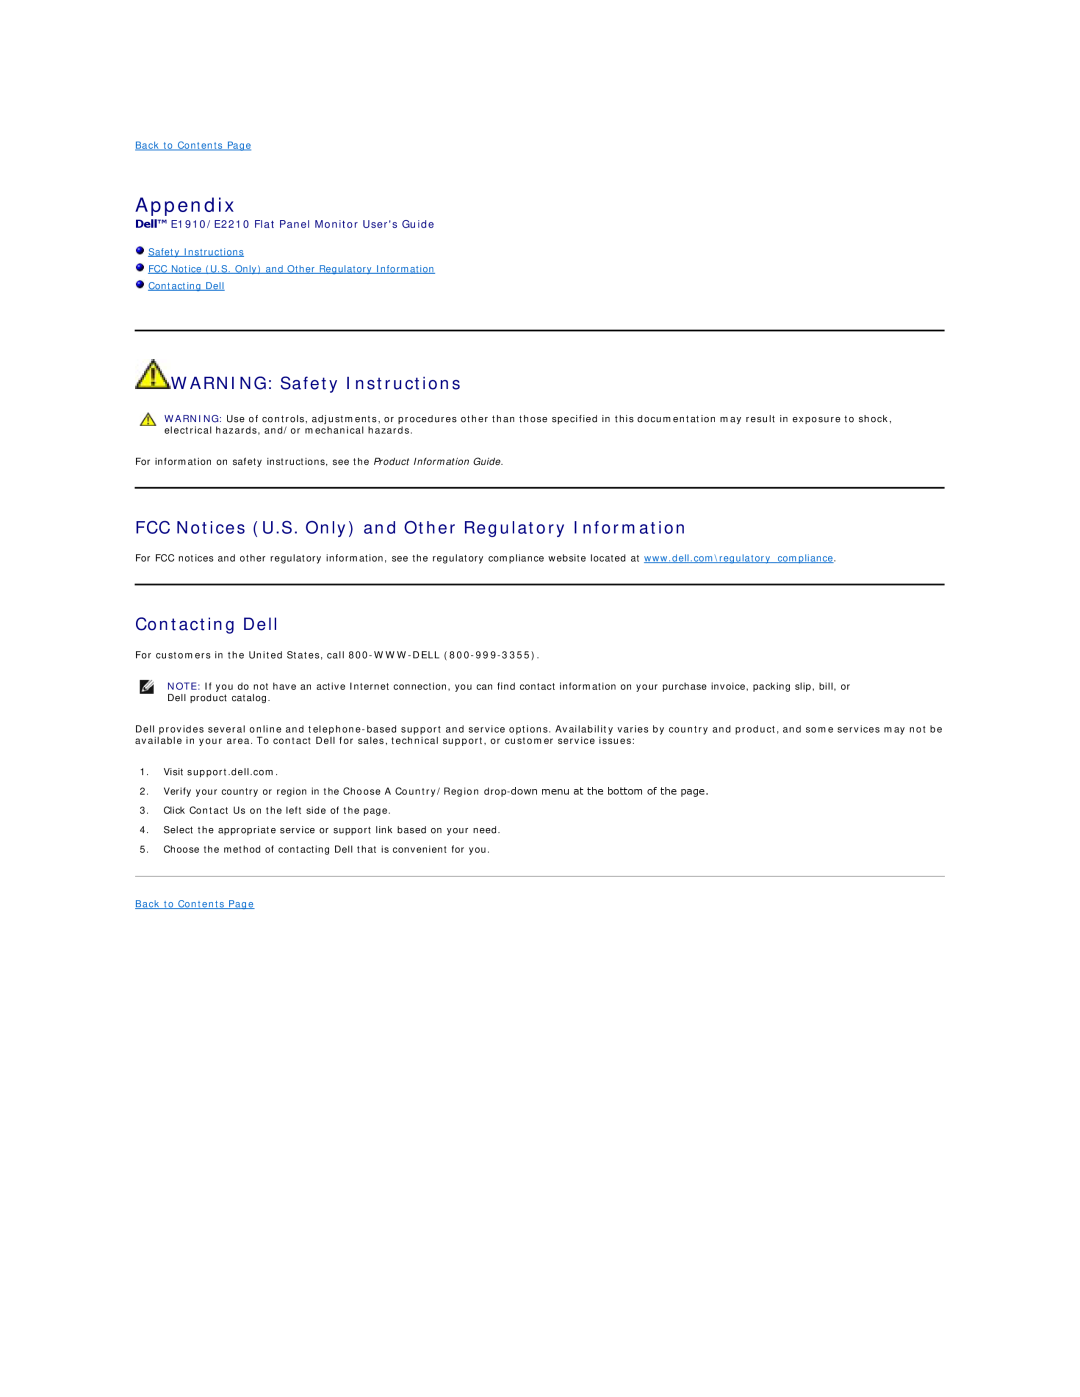 Dell E1910 Appendix, WARNING Safety Instructions, FCC Notices U.S. Only and Other Regulatory Information, Contacting Dell 